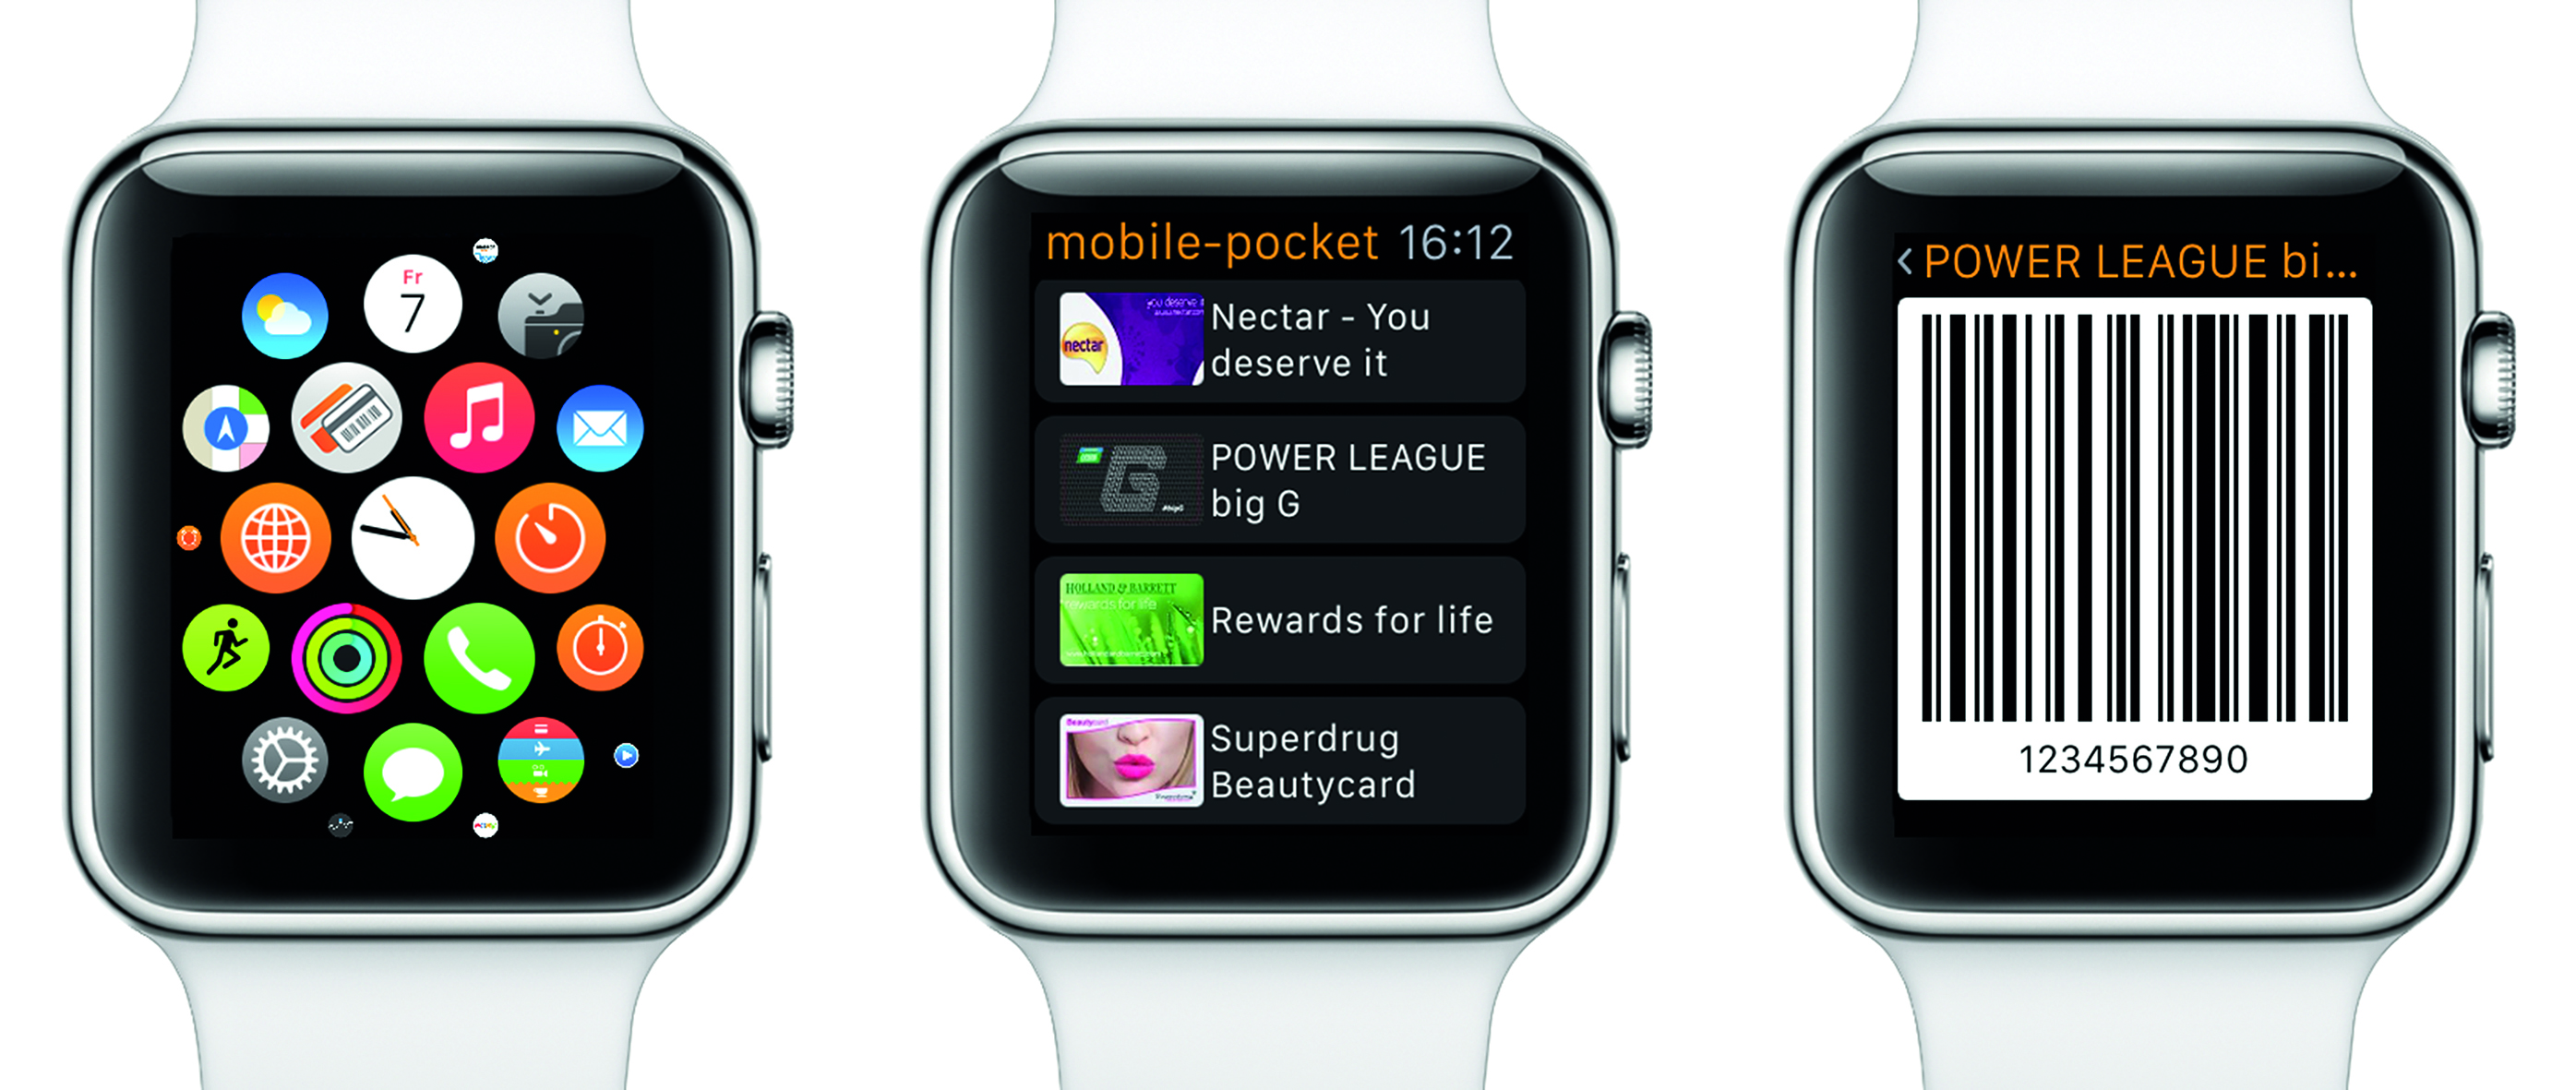 Mobile-pocket Launches Apple Watch Loyalty App